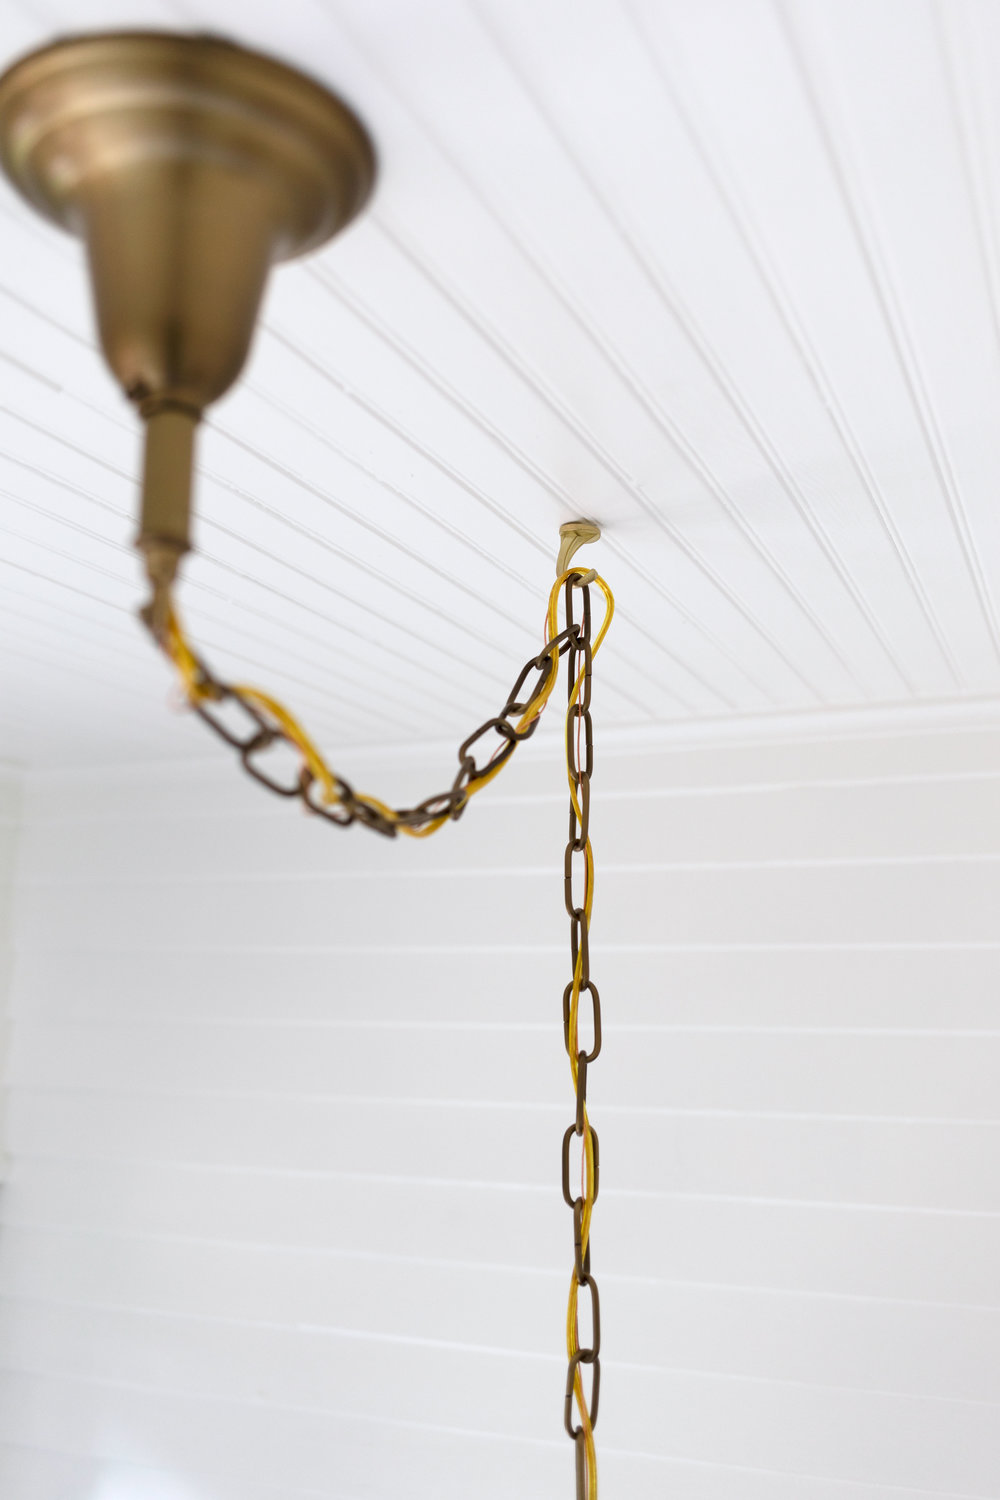 Center An Off Ceiling Light, How To Hook A Chandelier The Ceiling